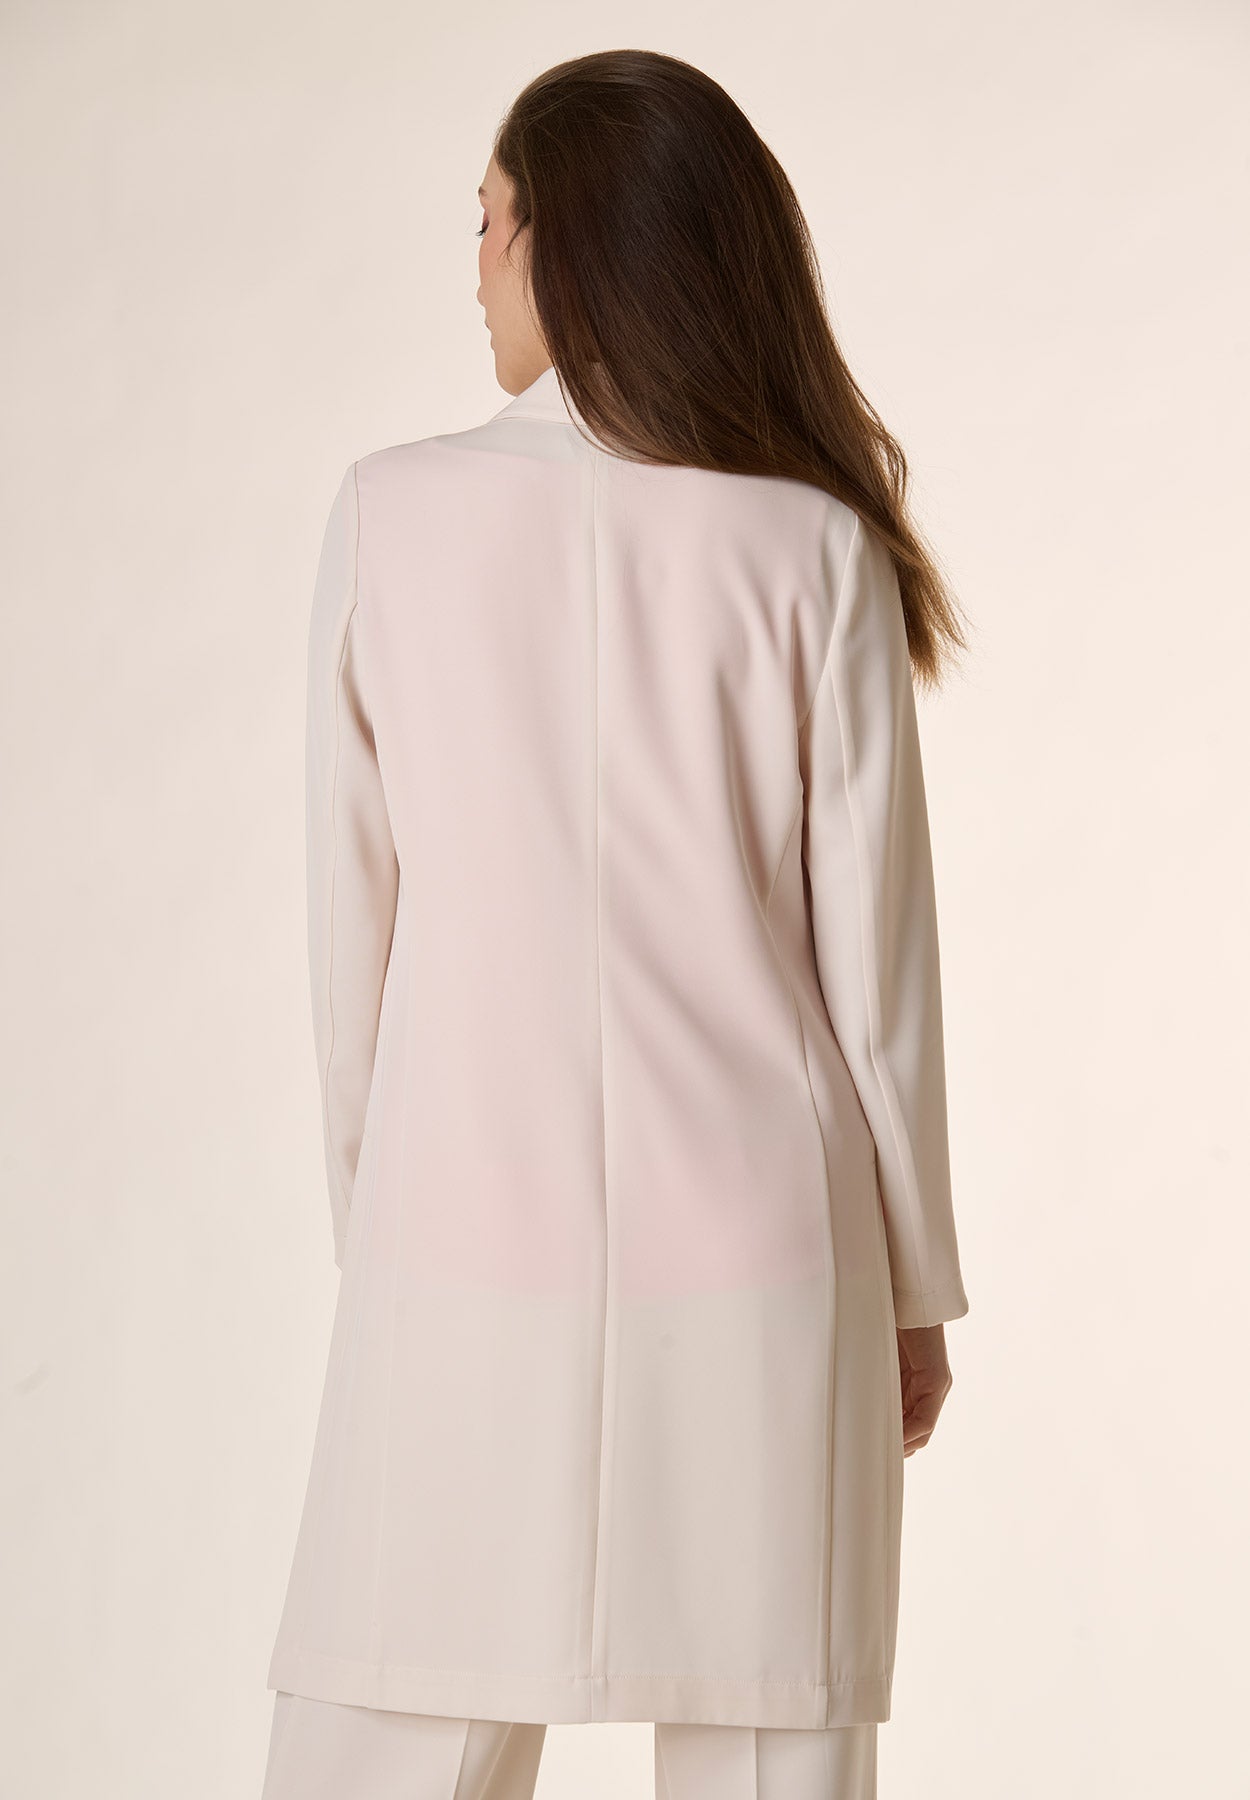 Cream coat with side slits